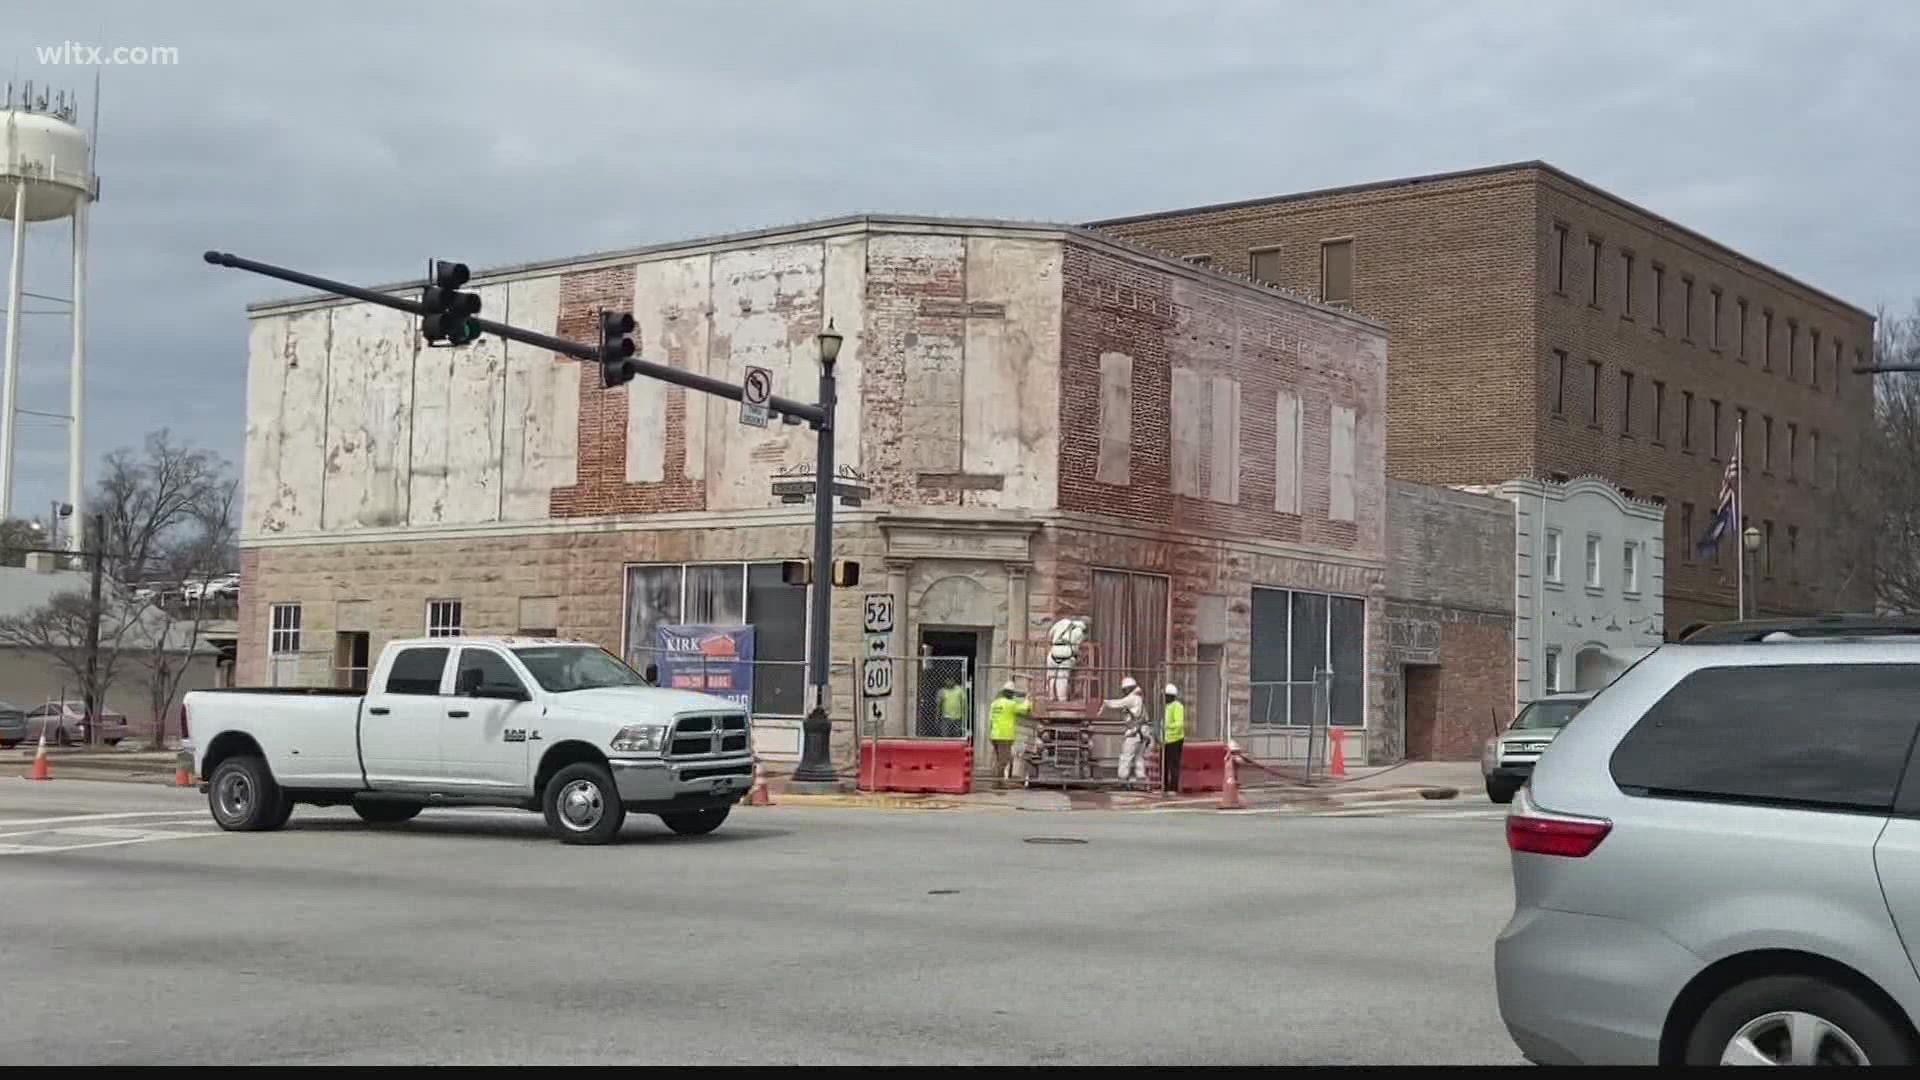 City officials say the city has made it a mission to support its businesses.